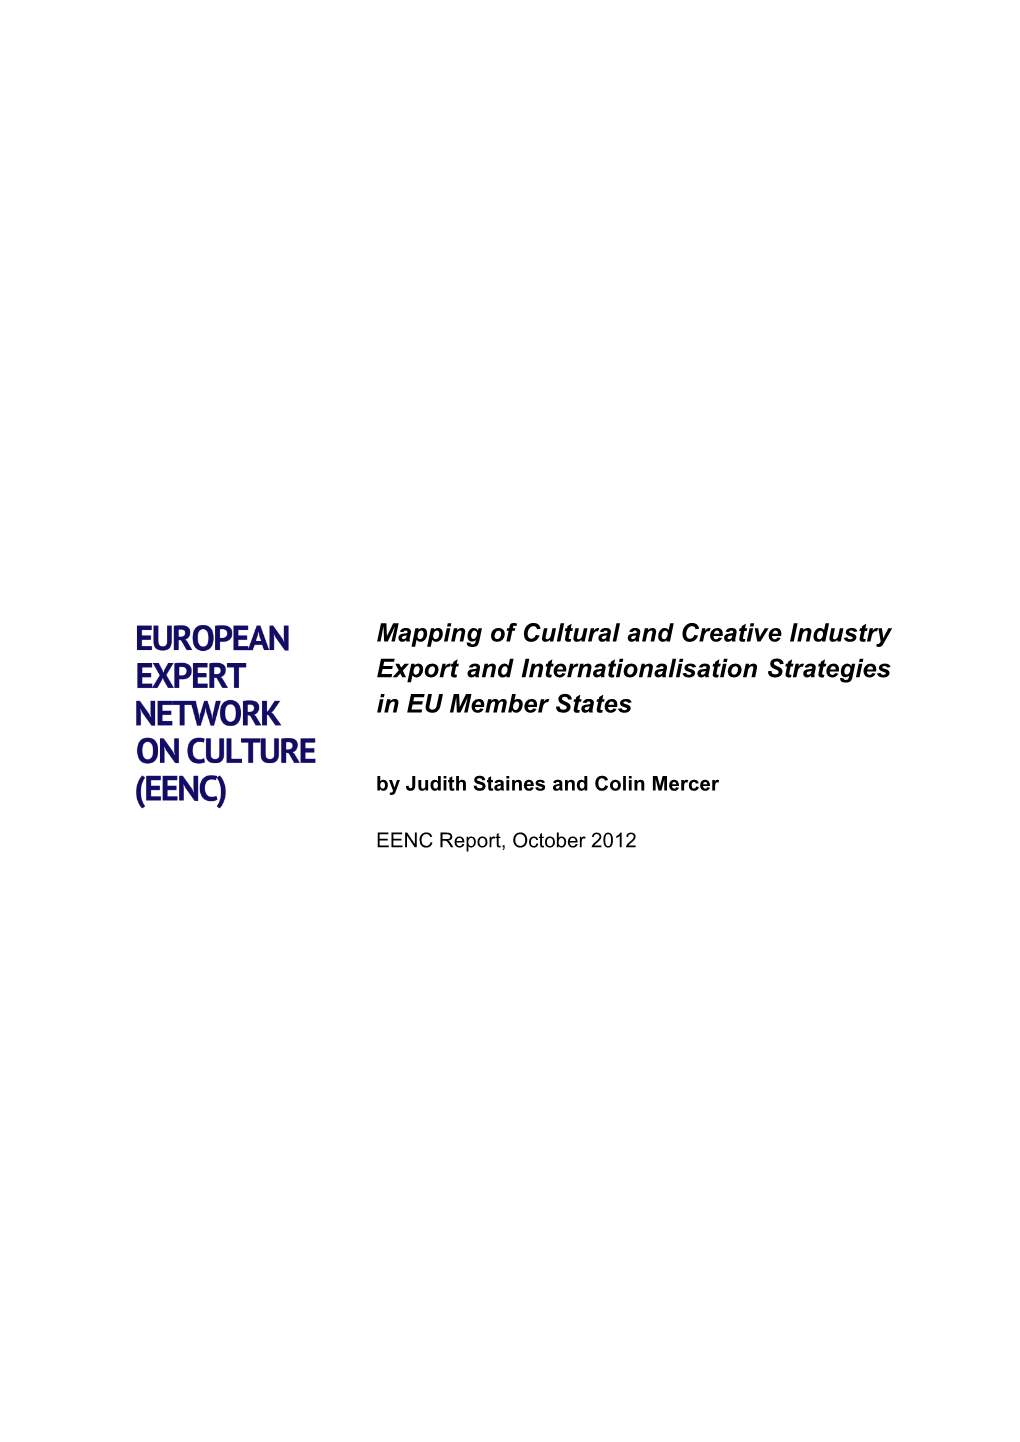 Mapping of CCI Export and Internationalisation Strategies in EU Member States